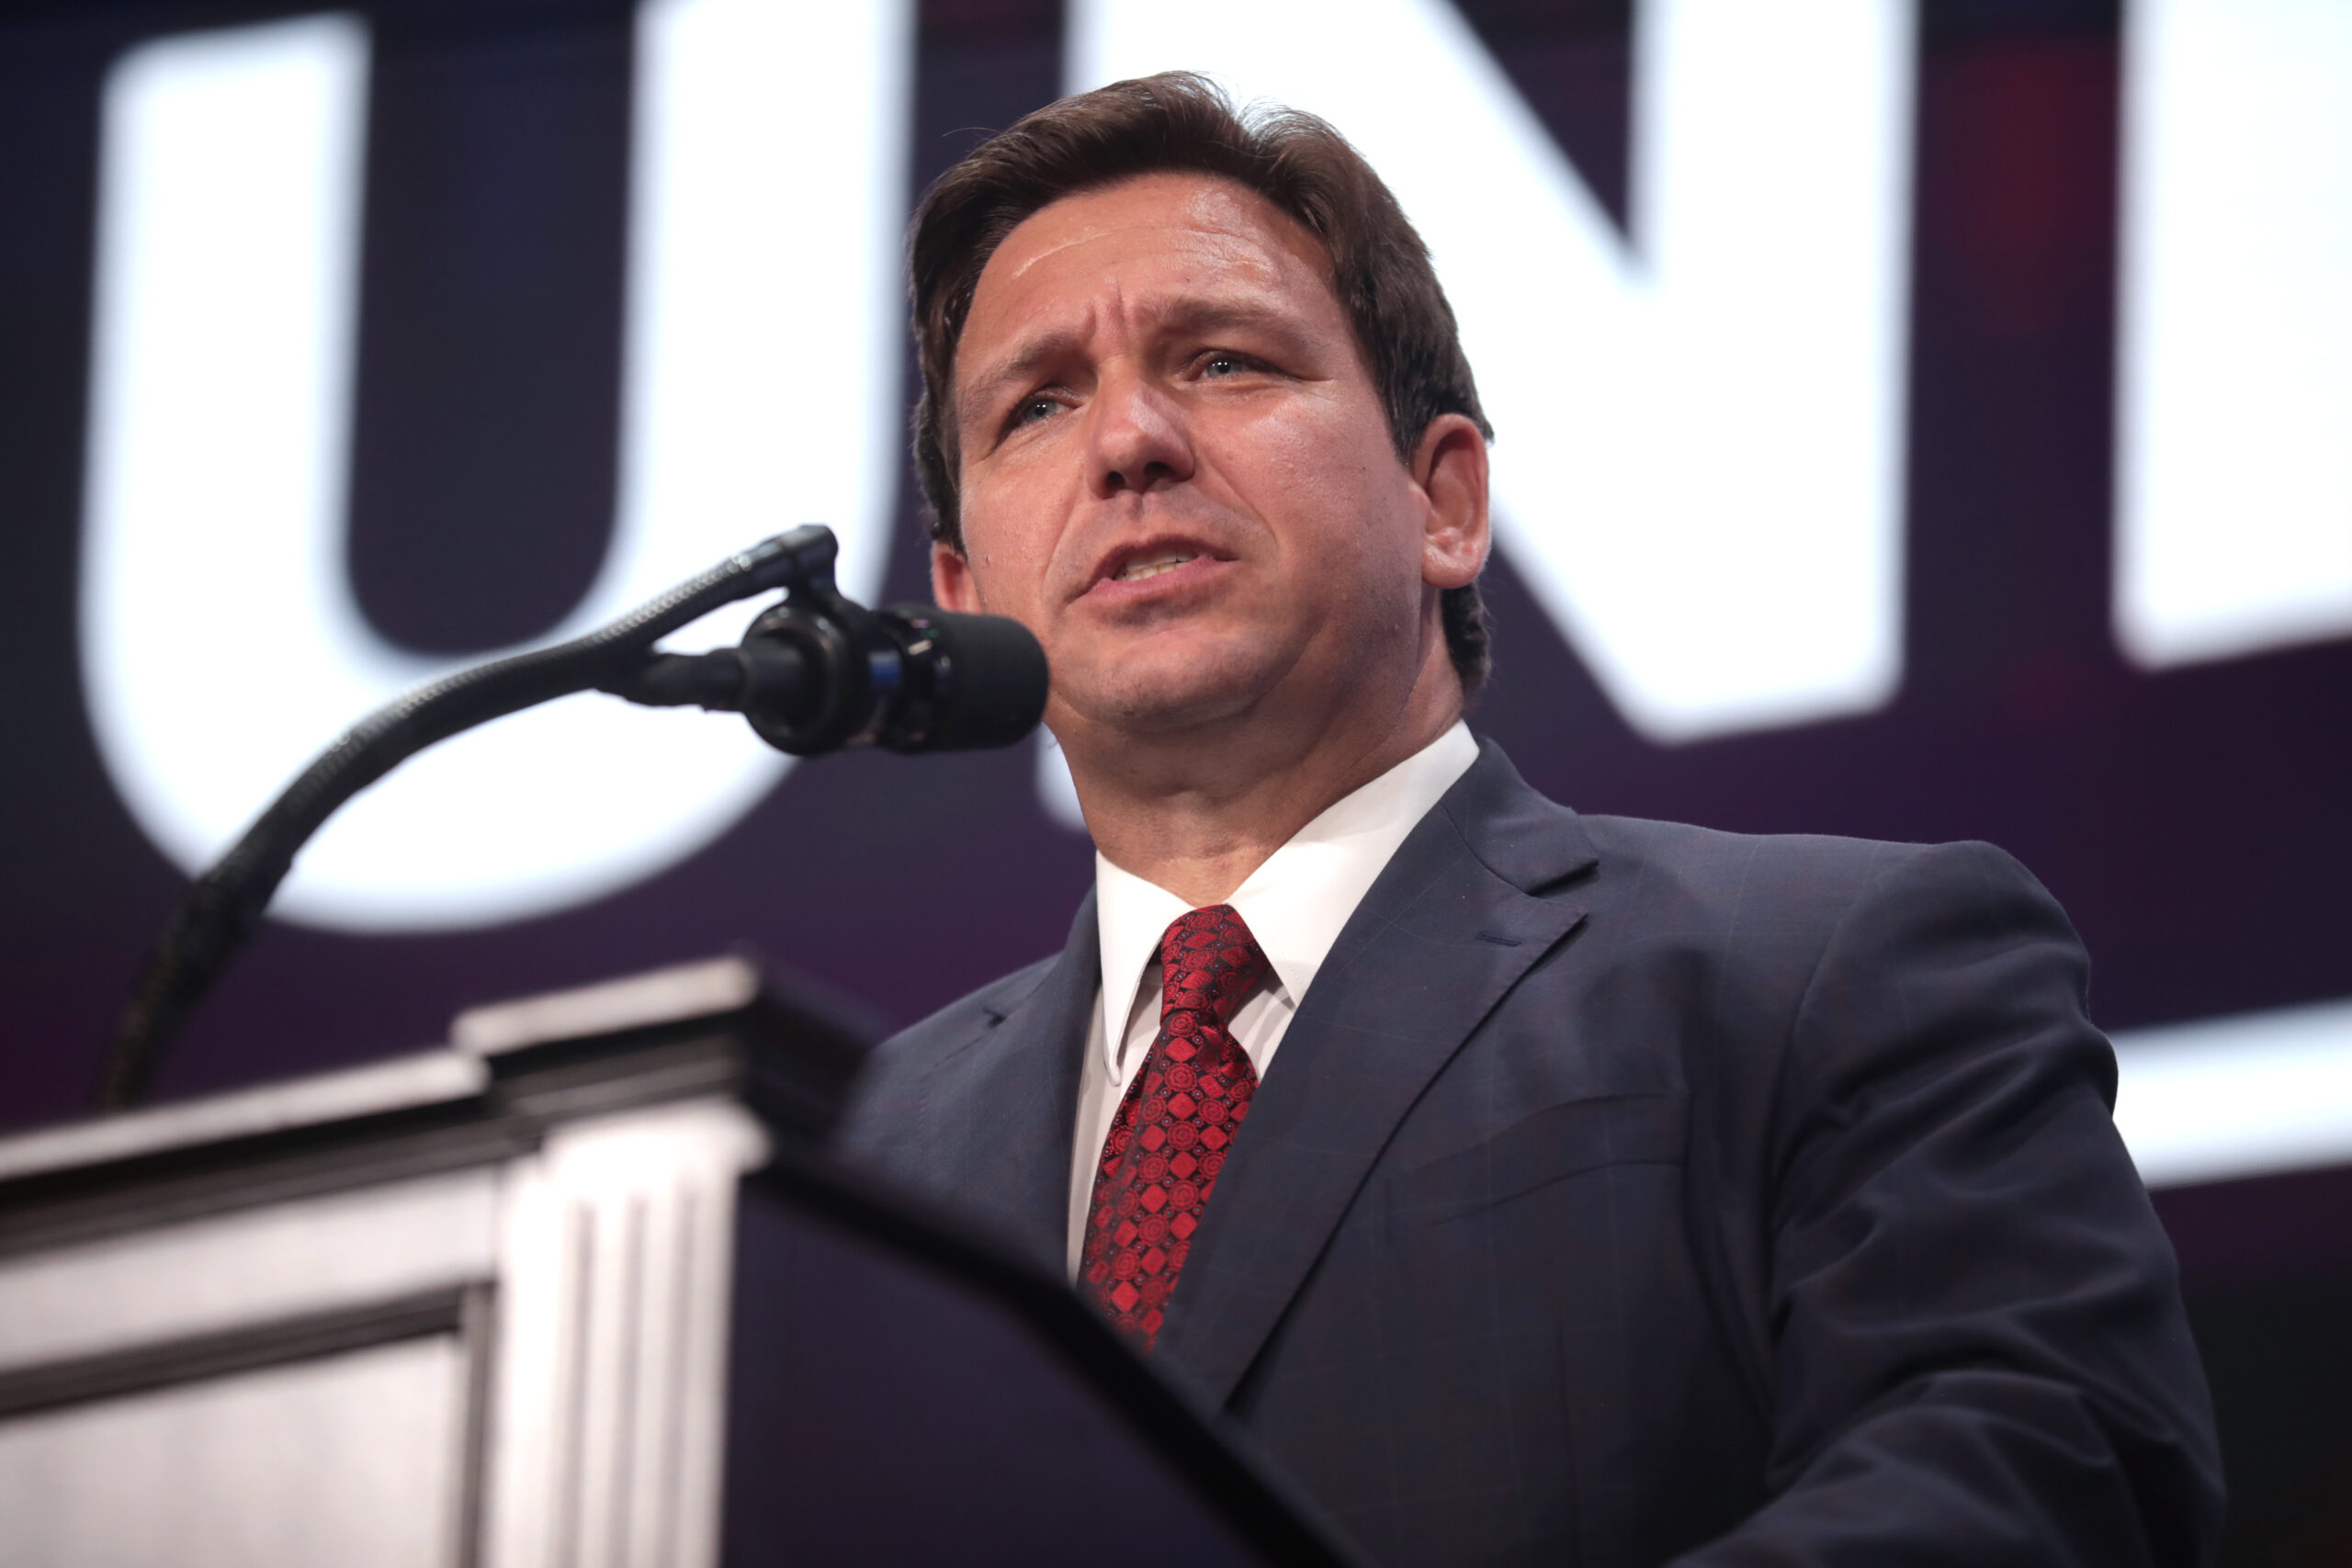 Governor Ron DeSantis speaking with attendees at a "Unite & Win Rally" at Arizona Financial Theatre in Phoenix, Arizona.